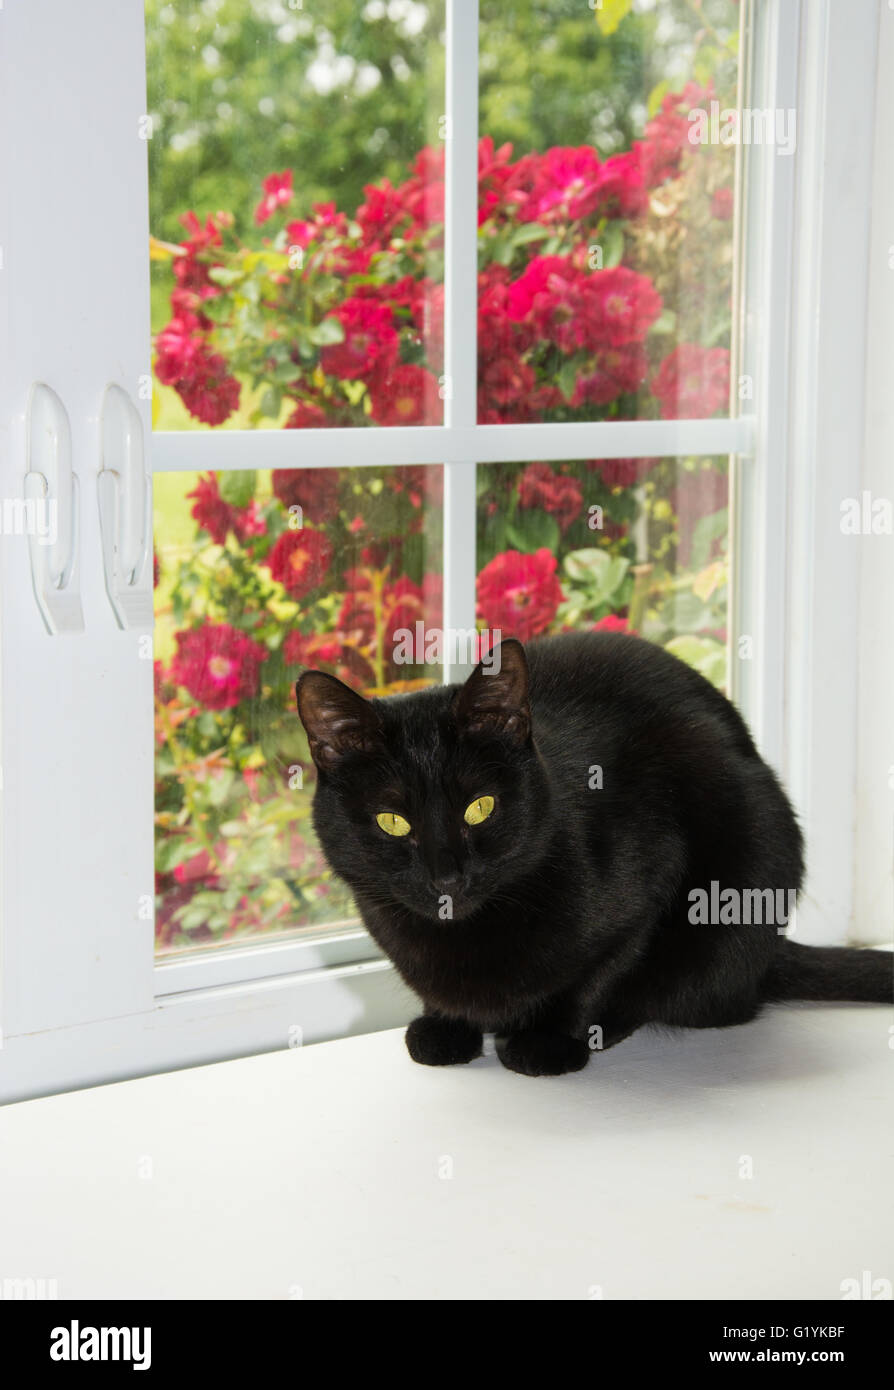 Shiny black cat in front of a window Stock Photo